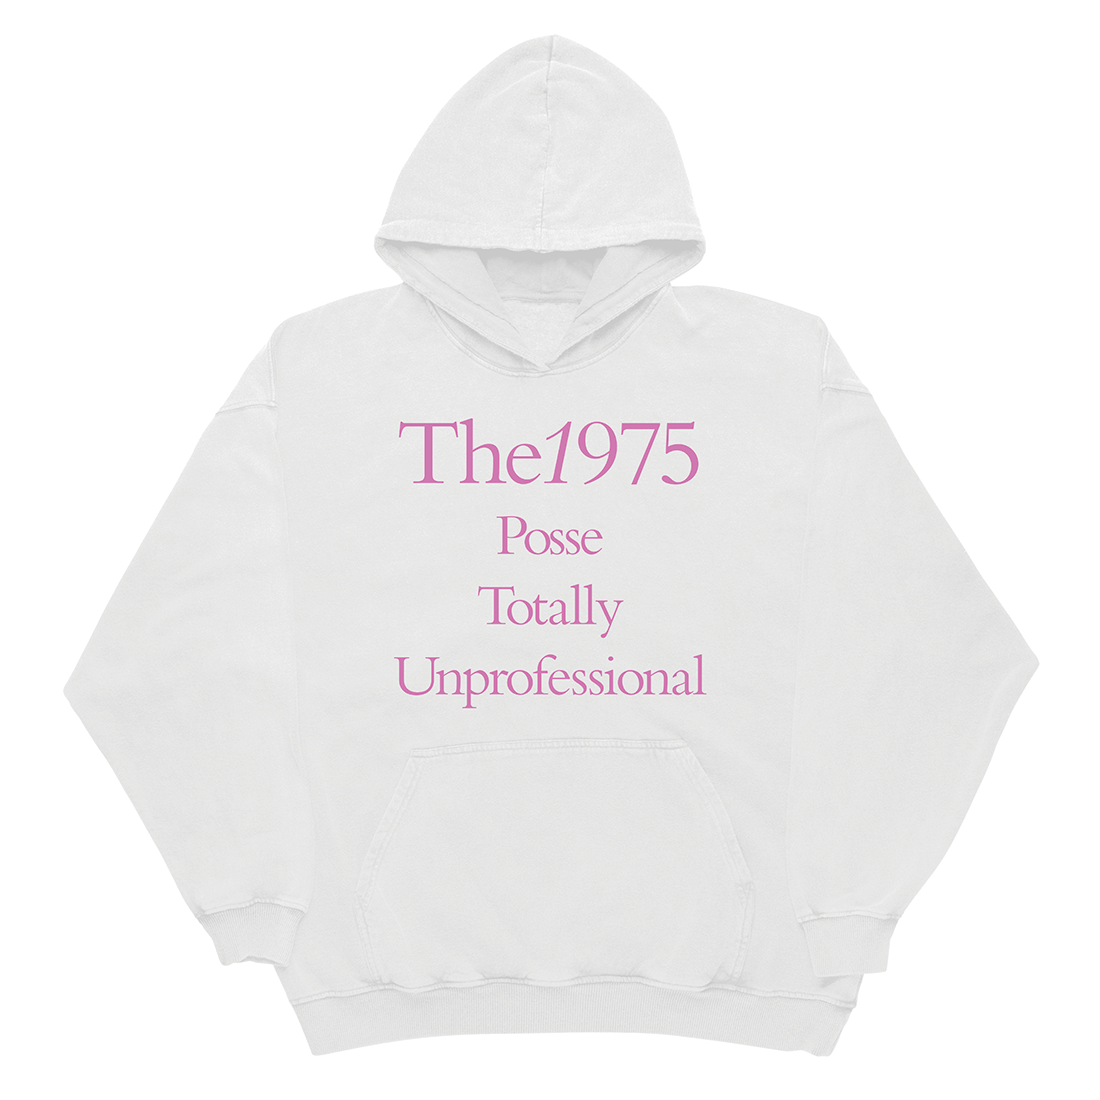 The 1975 - Totally Unprofessional Hoodie